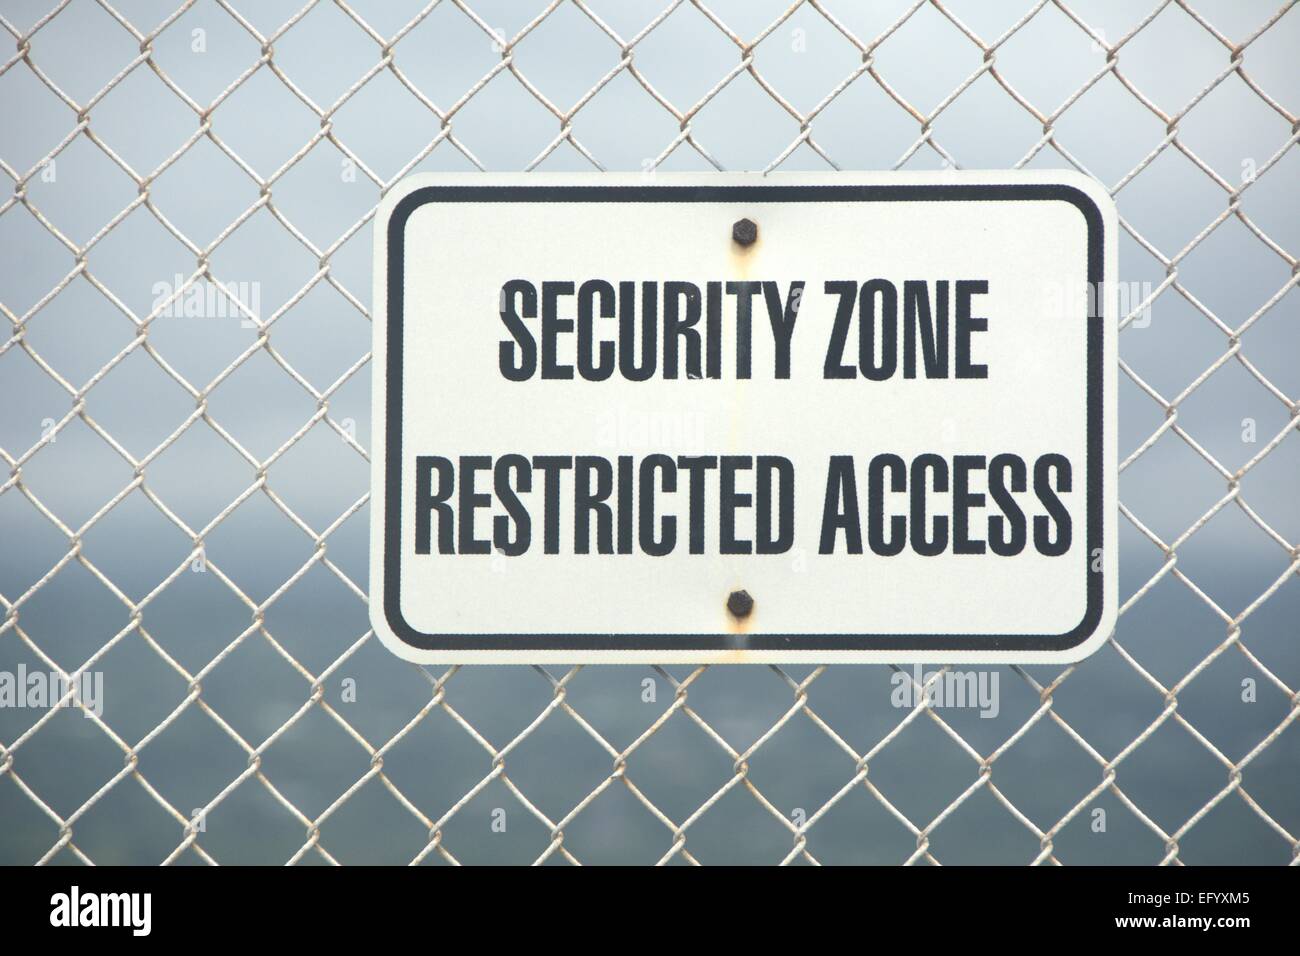 Security zone restricted access sign on  a wire mesh fence Stock Photo